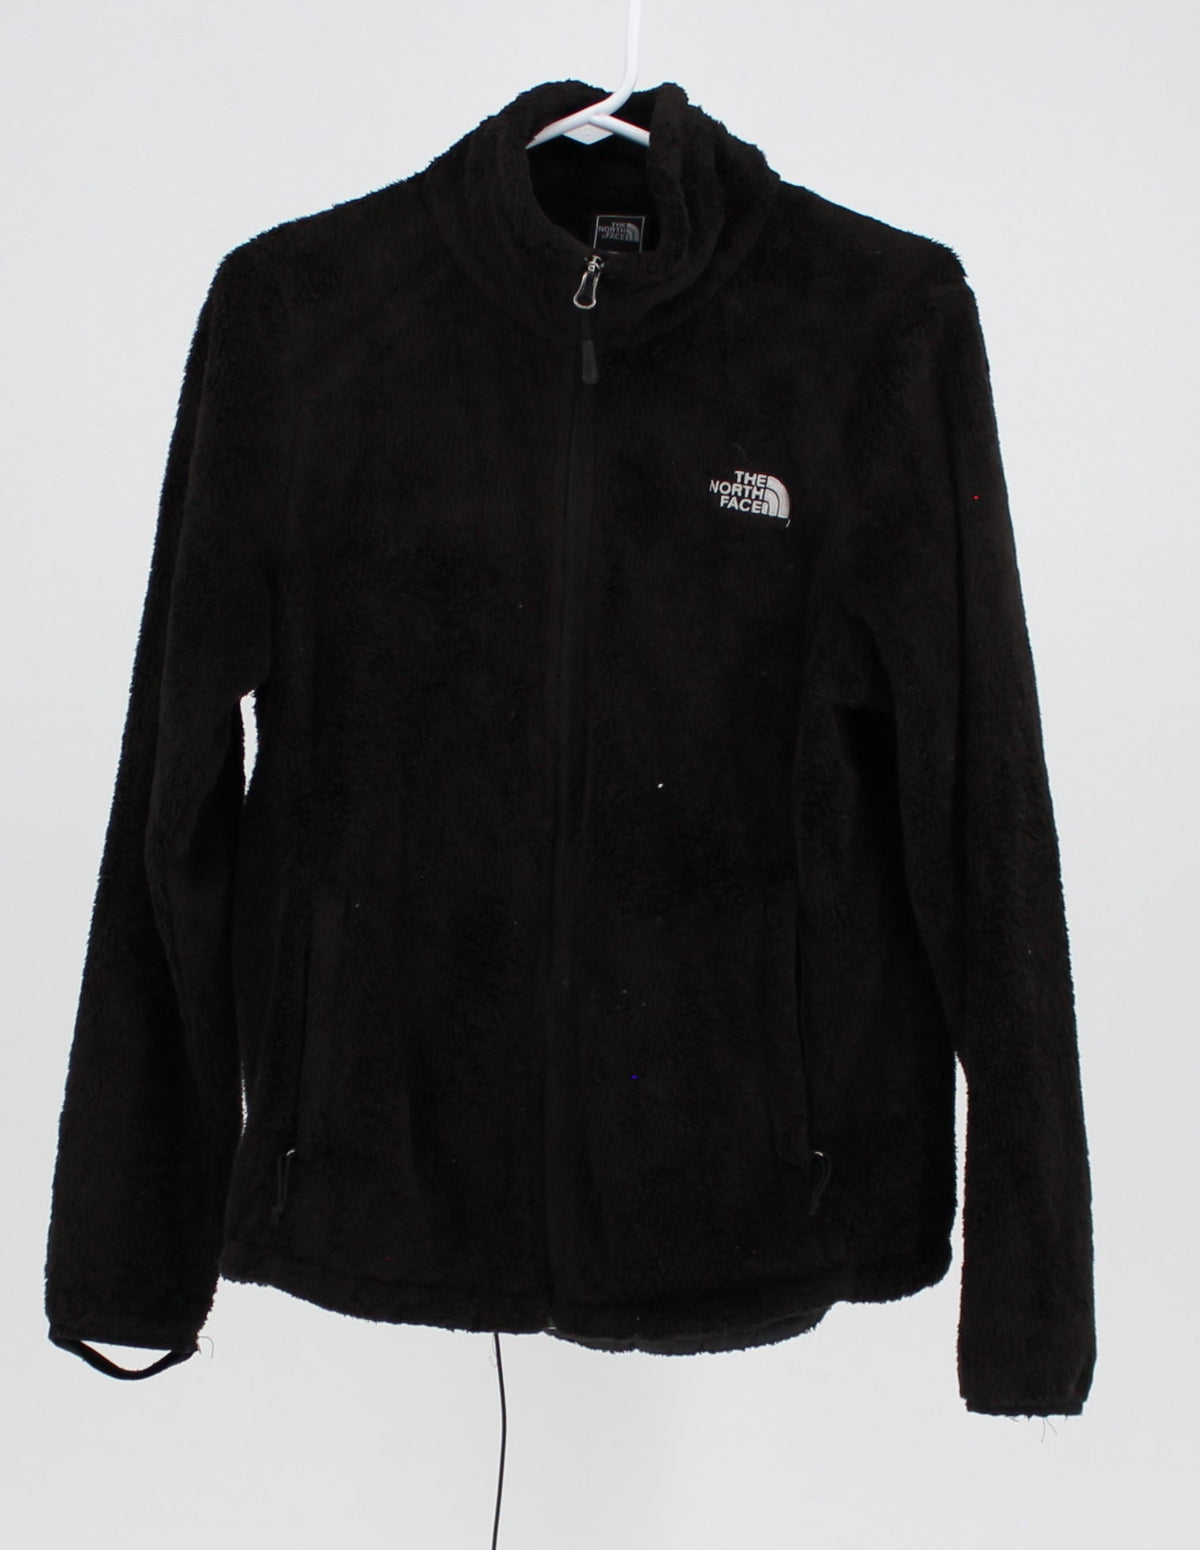 The North Face Black Sherpa Style Zip-Up Sweater